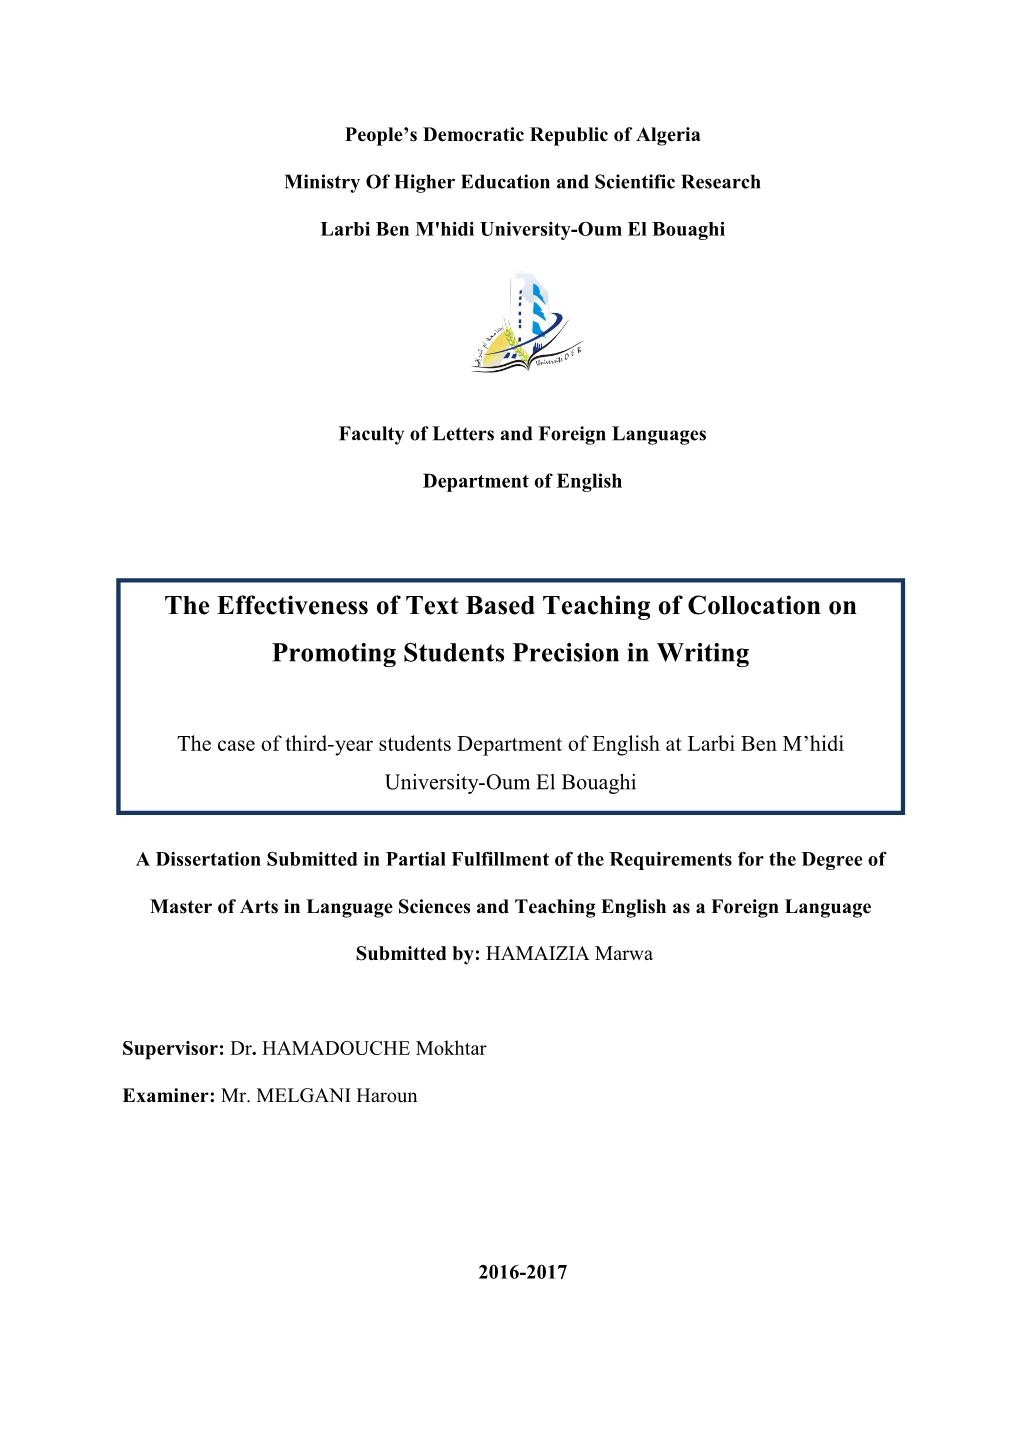 The Effectiveness of Text Based Teaching of Collocation On